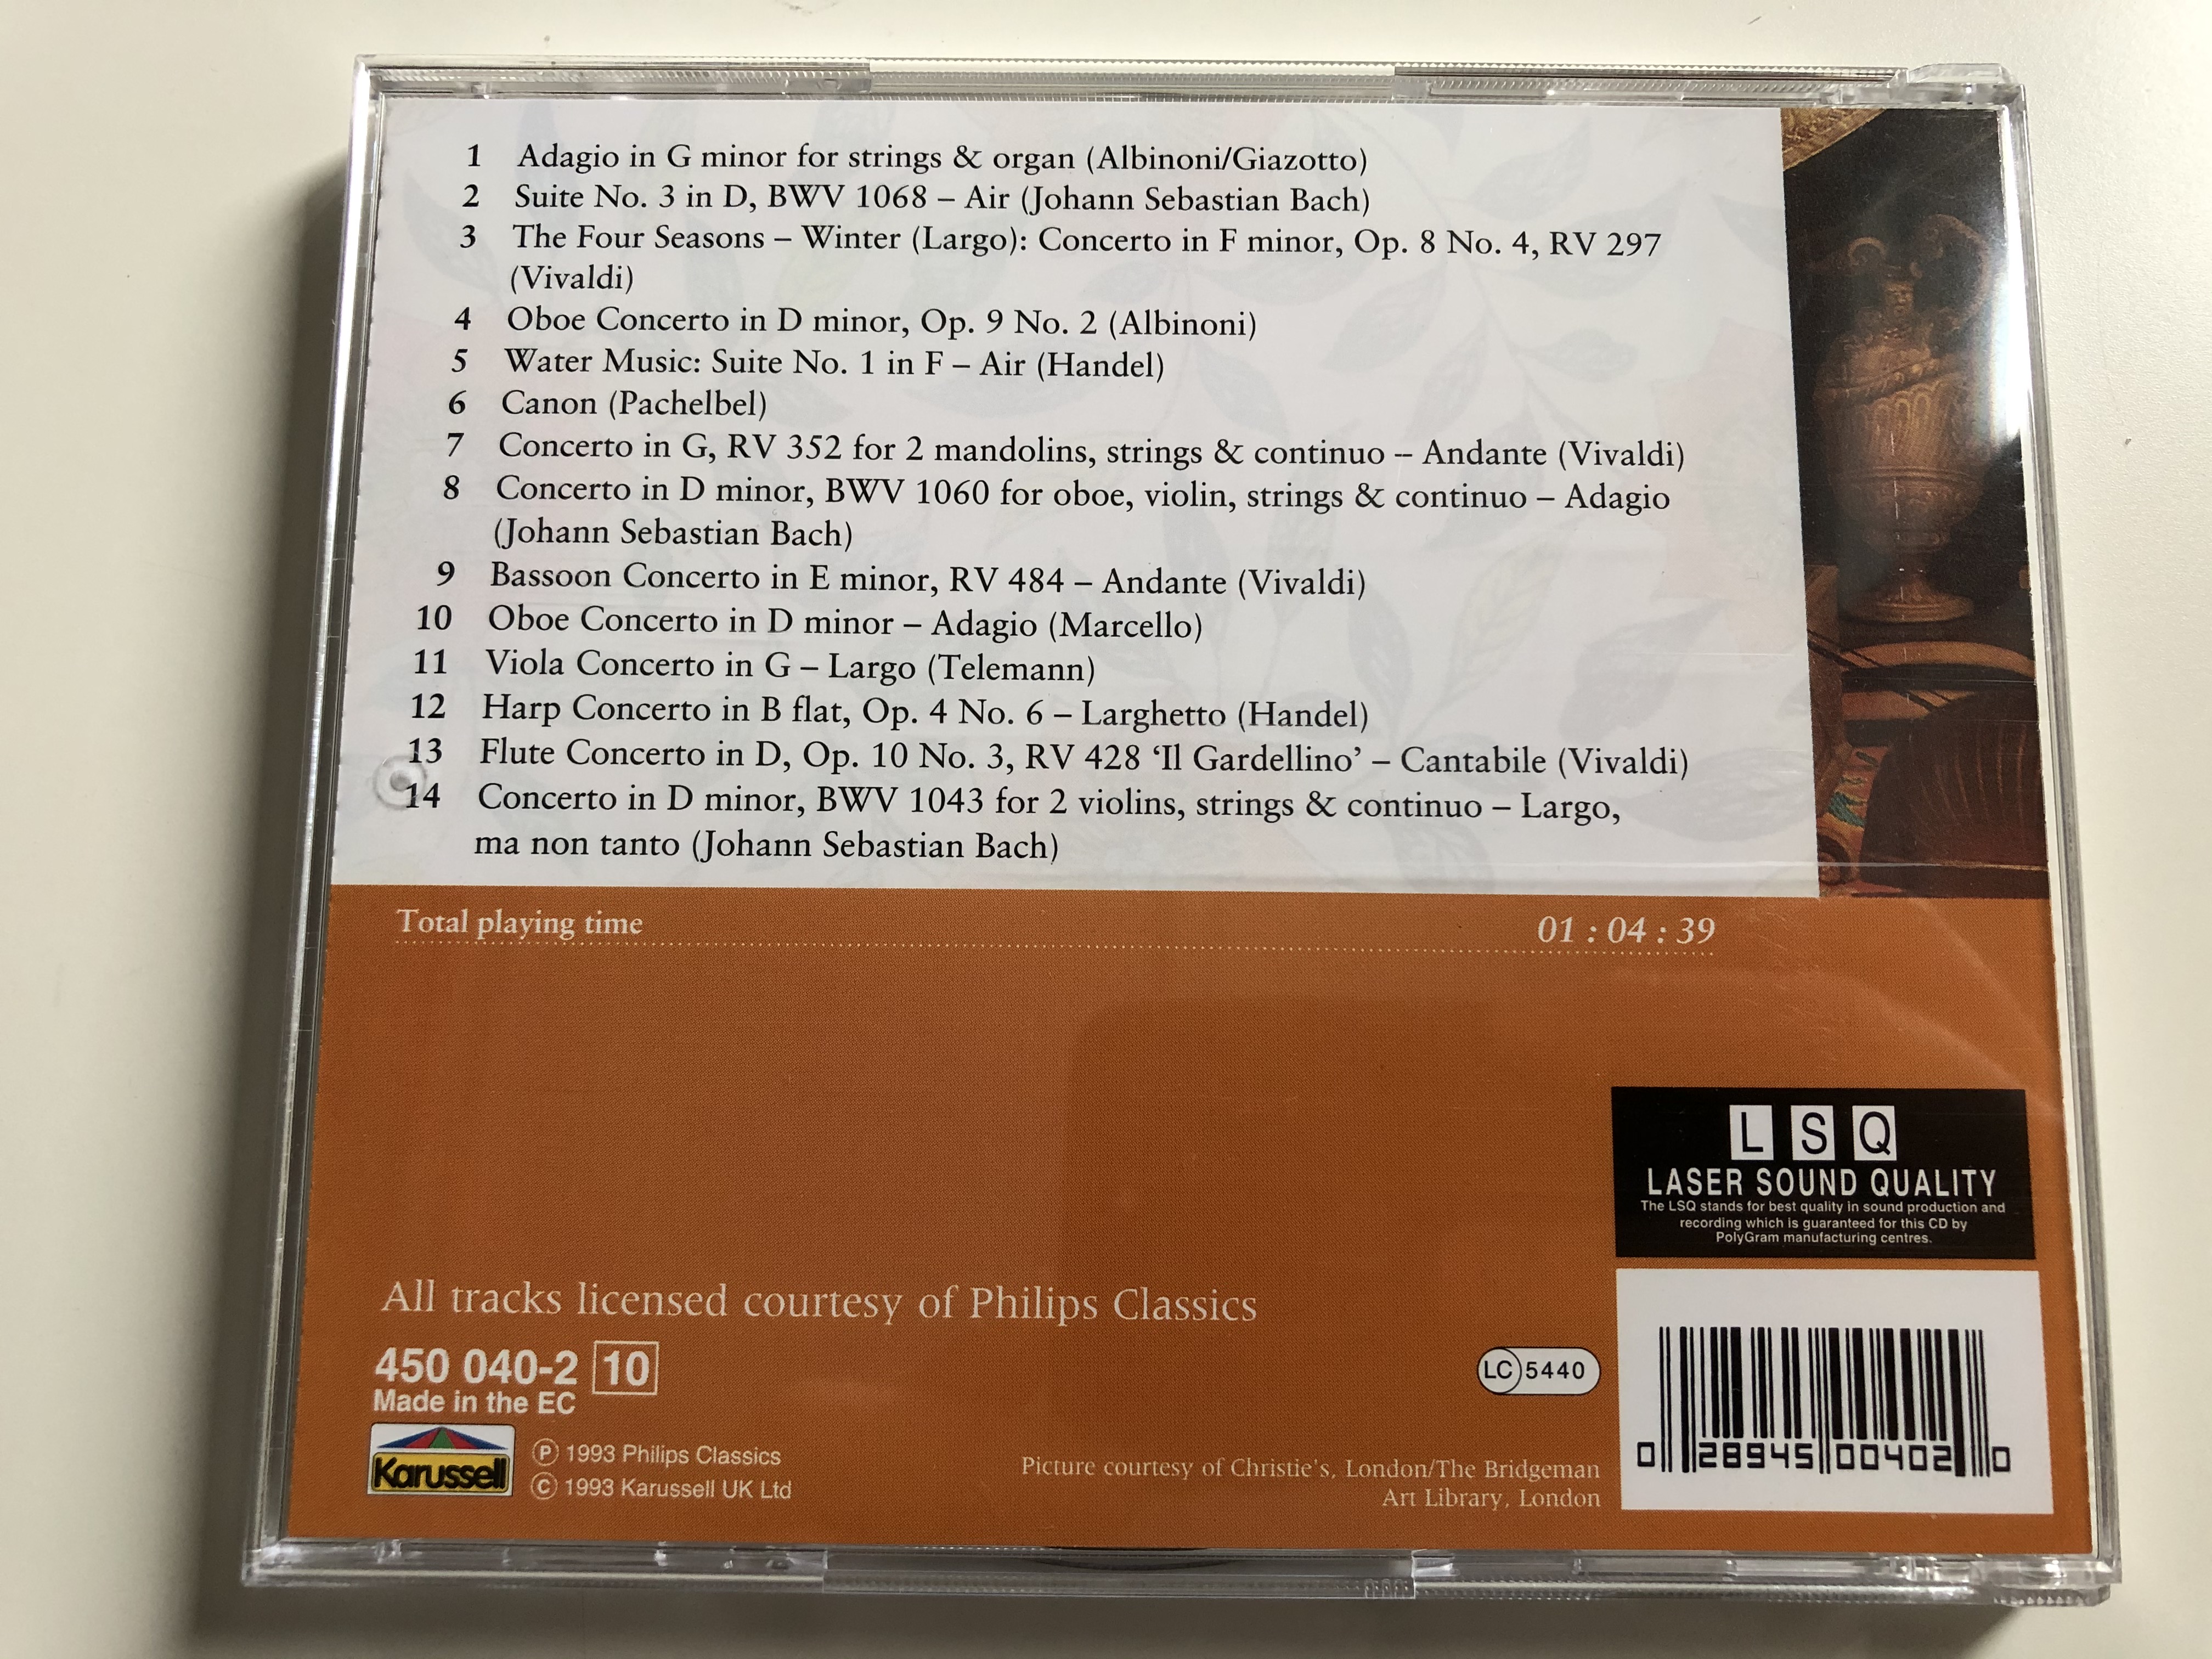 baroque-favourites-includes-albinoni-adagio-pachelbel-canon-and-many-more-featuring-academy-of-st-martin-in-the-fields-conducted-by-sir-neville-marriner-belart-audio-cd-1993-450-040-2-5-.jpg